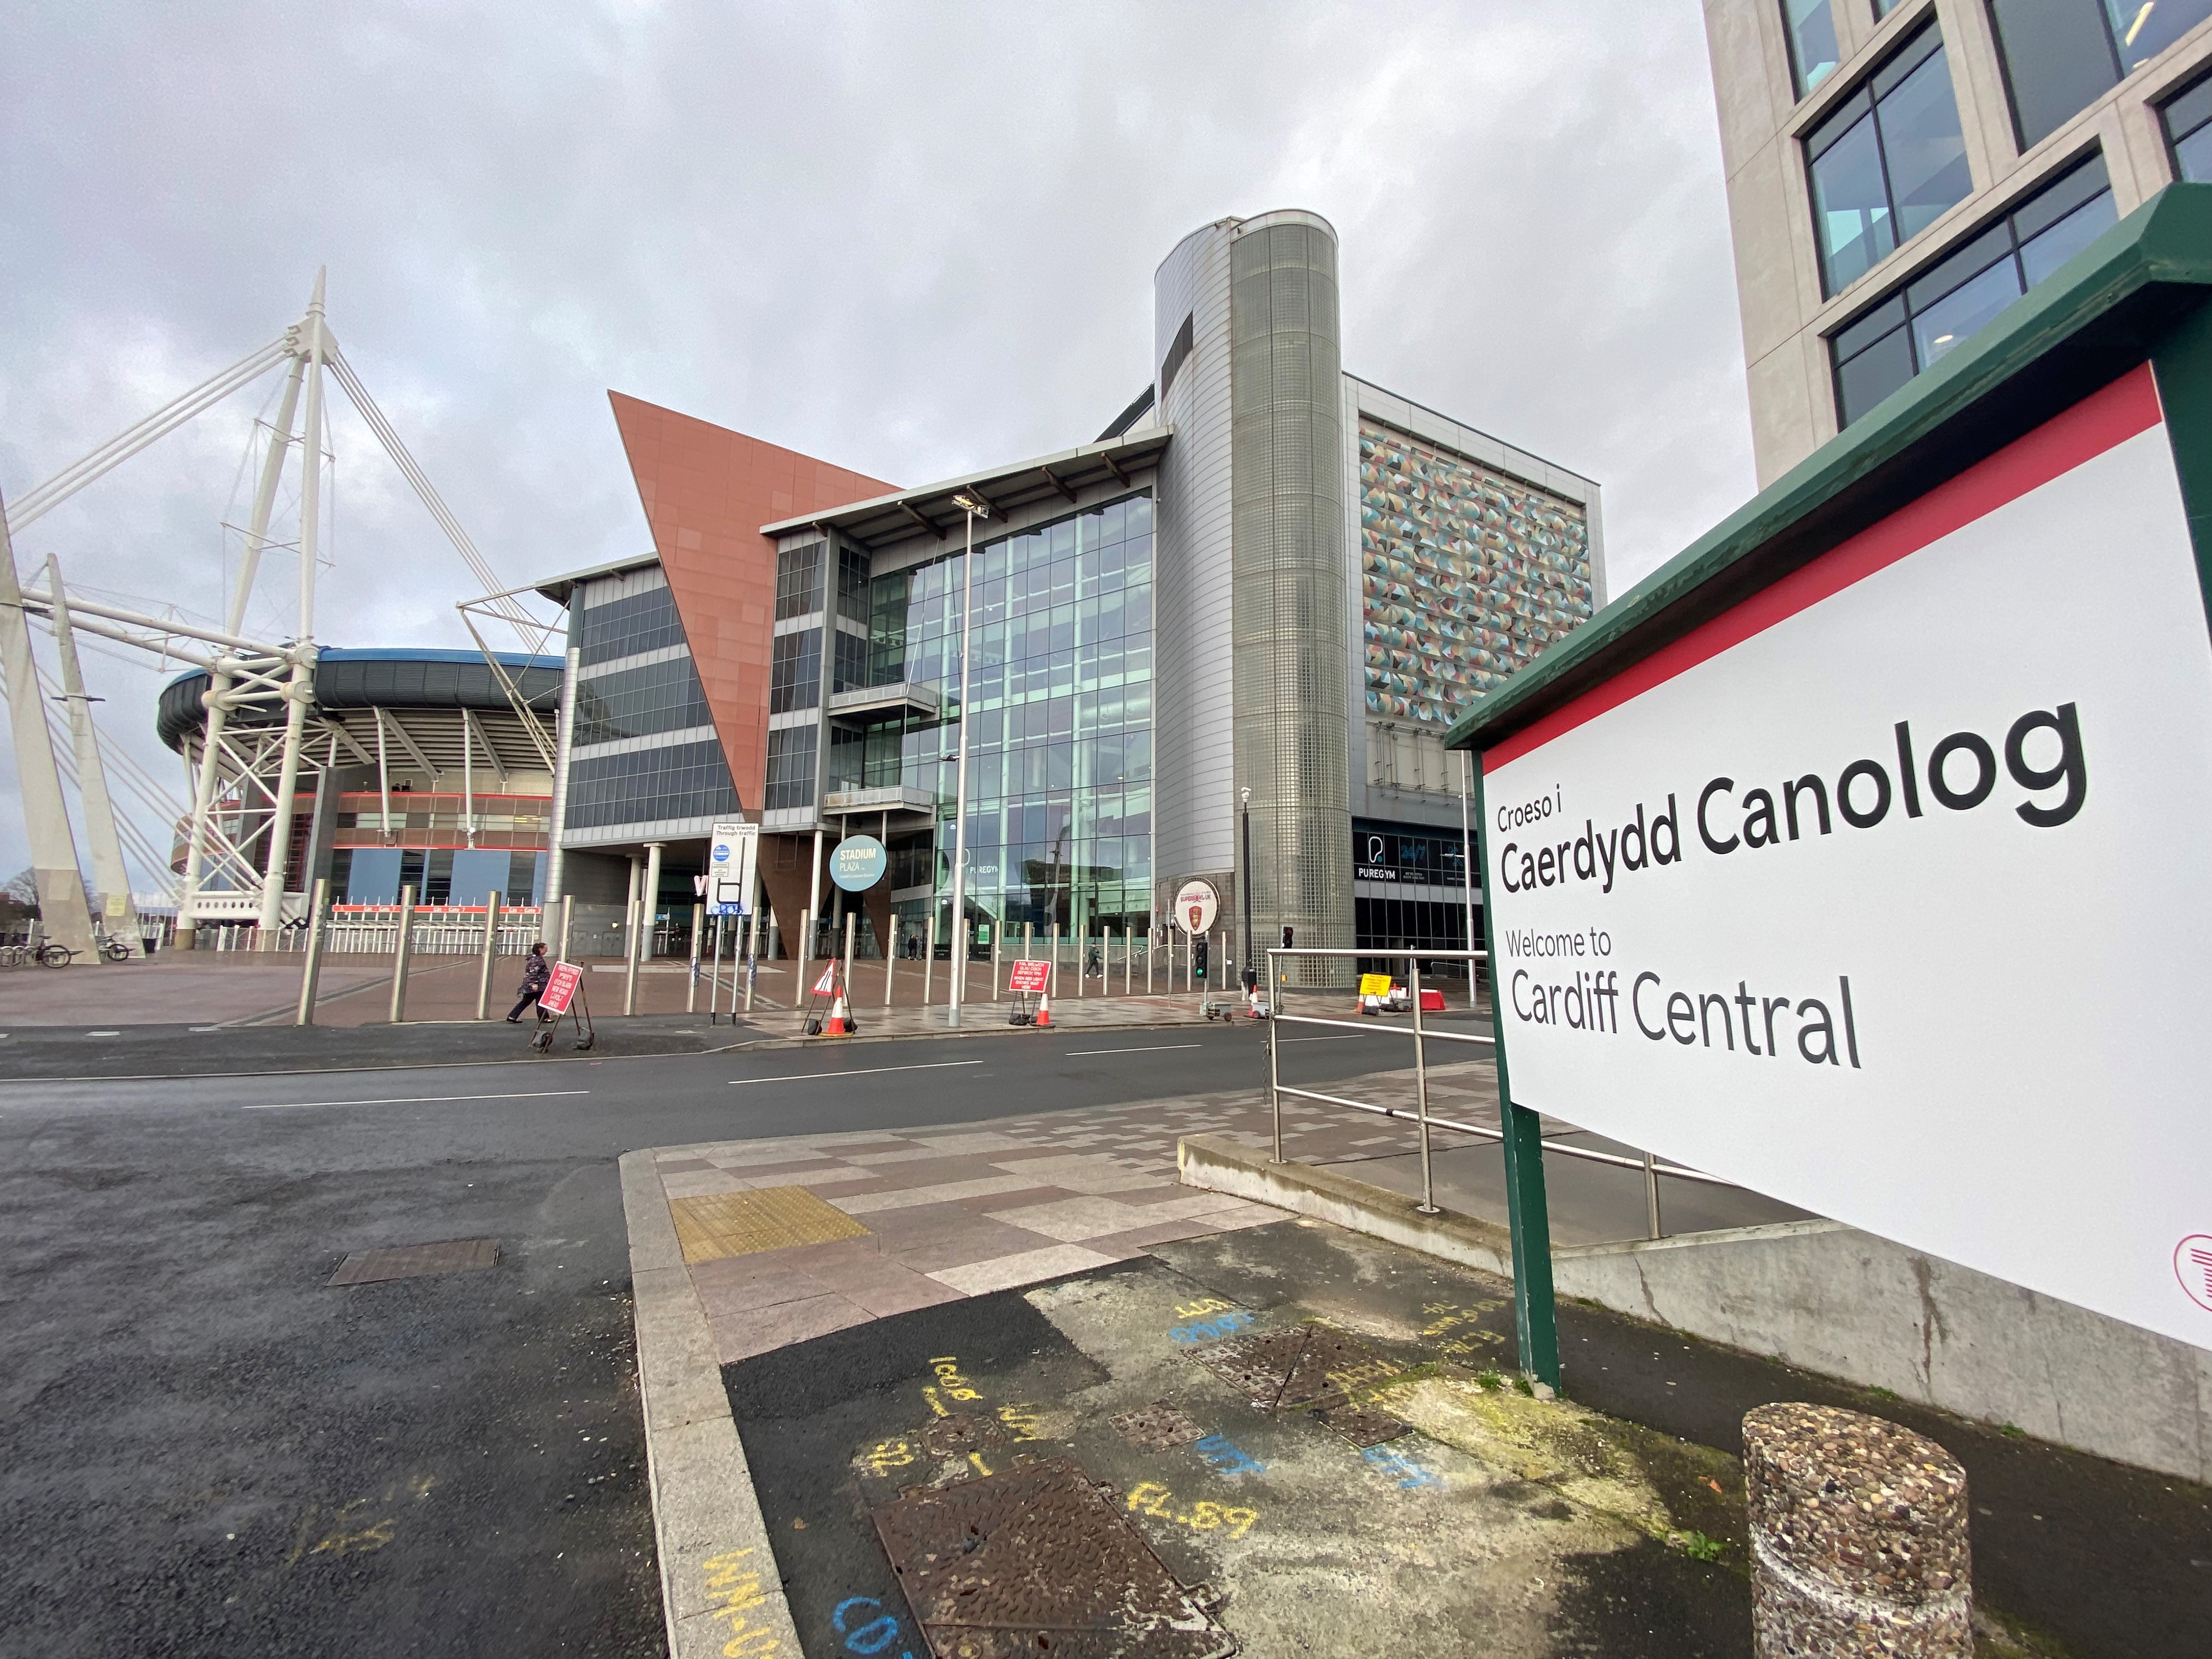 Principality Stadium and Cardiff Central Station